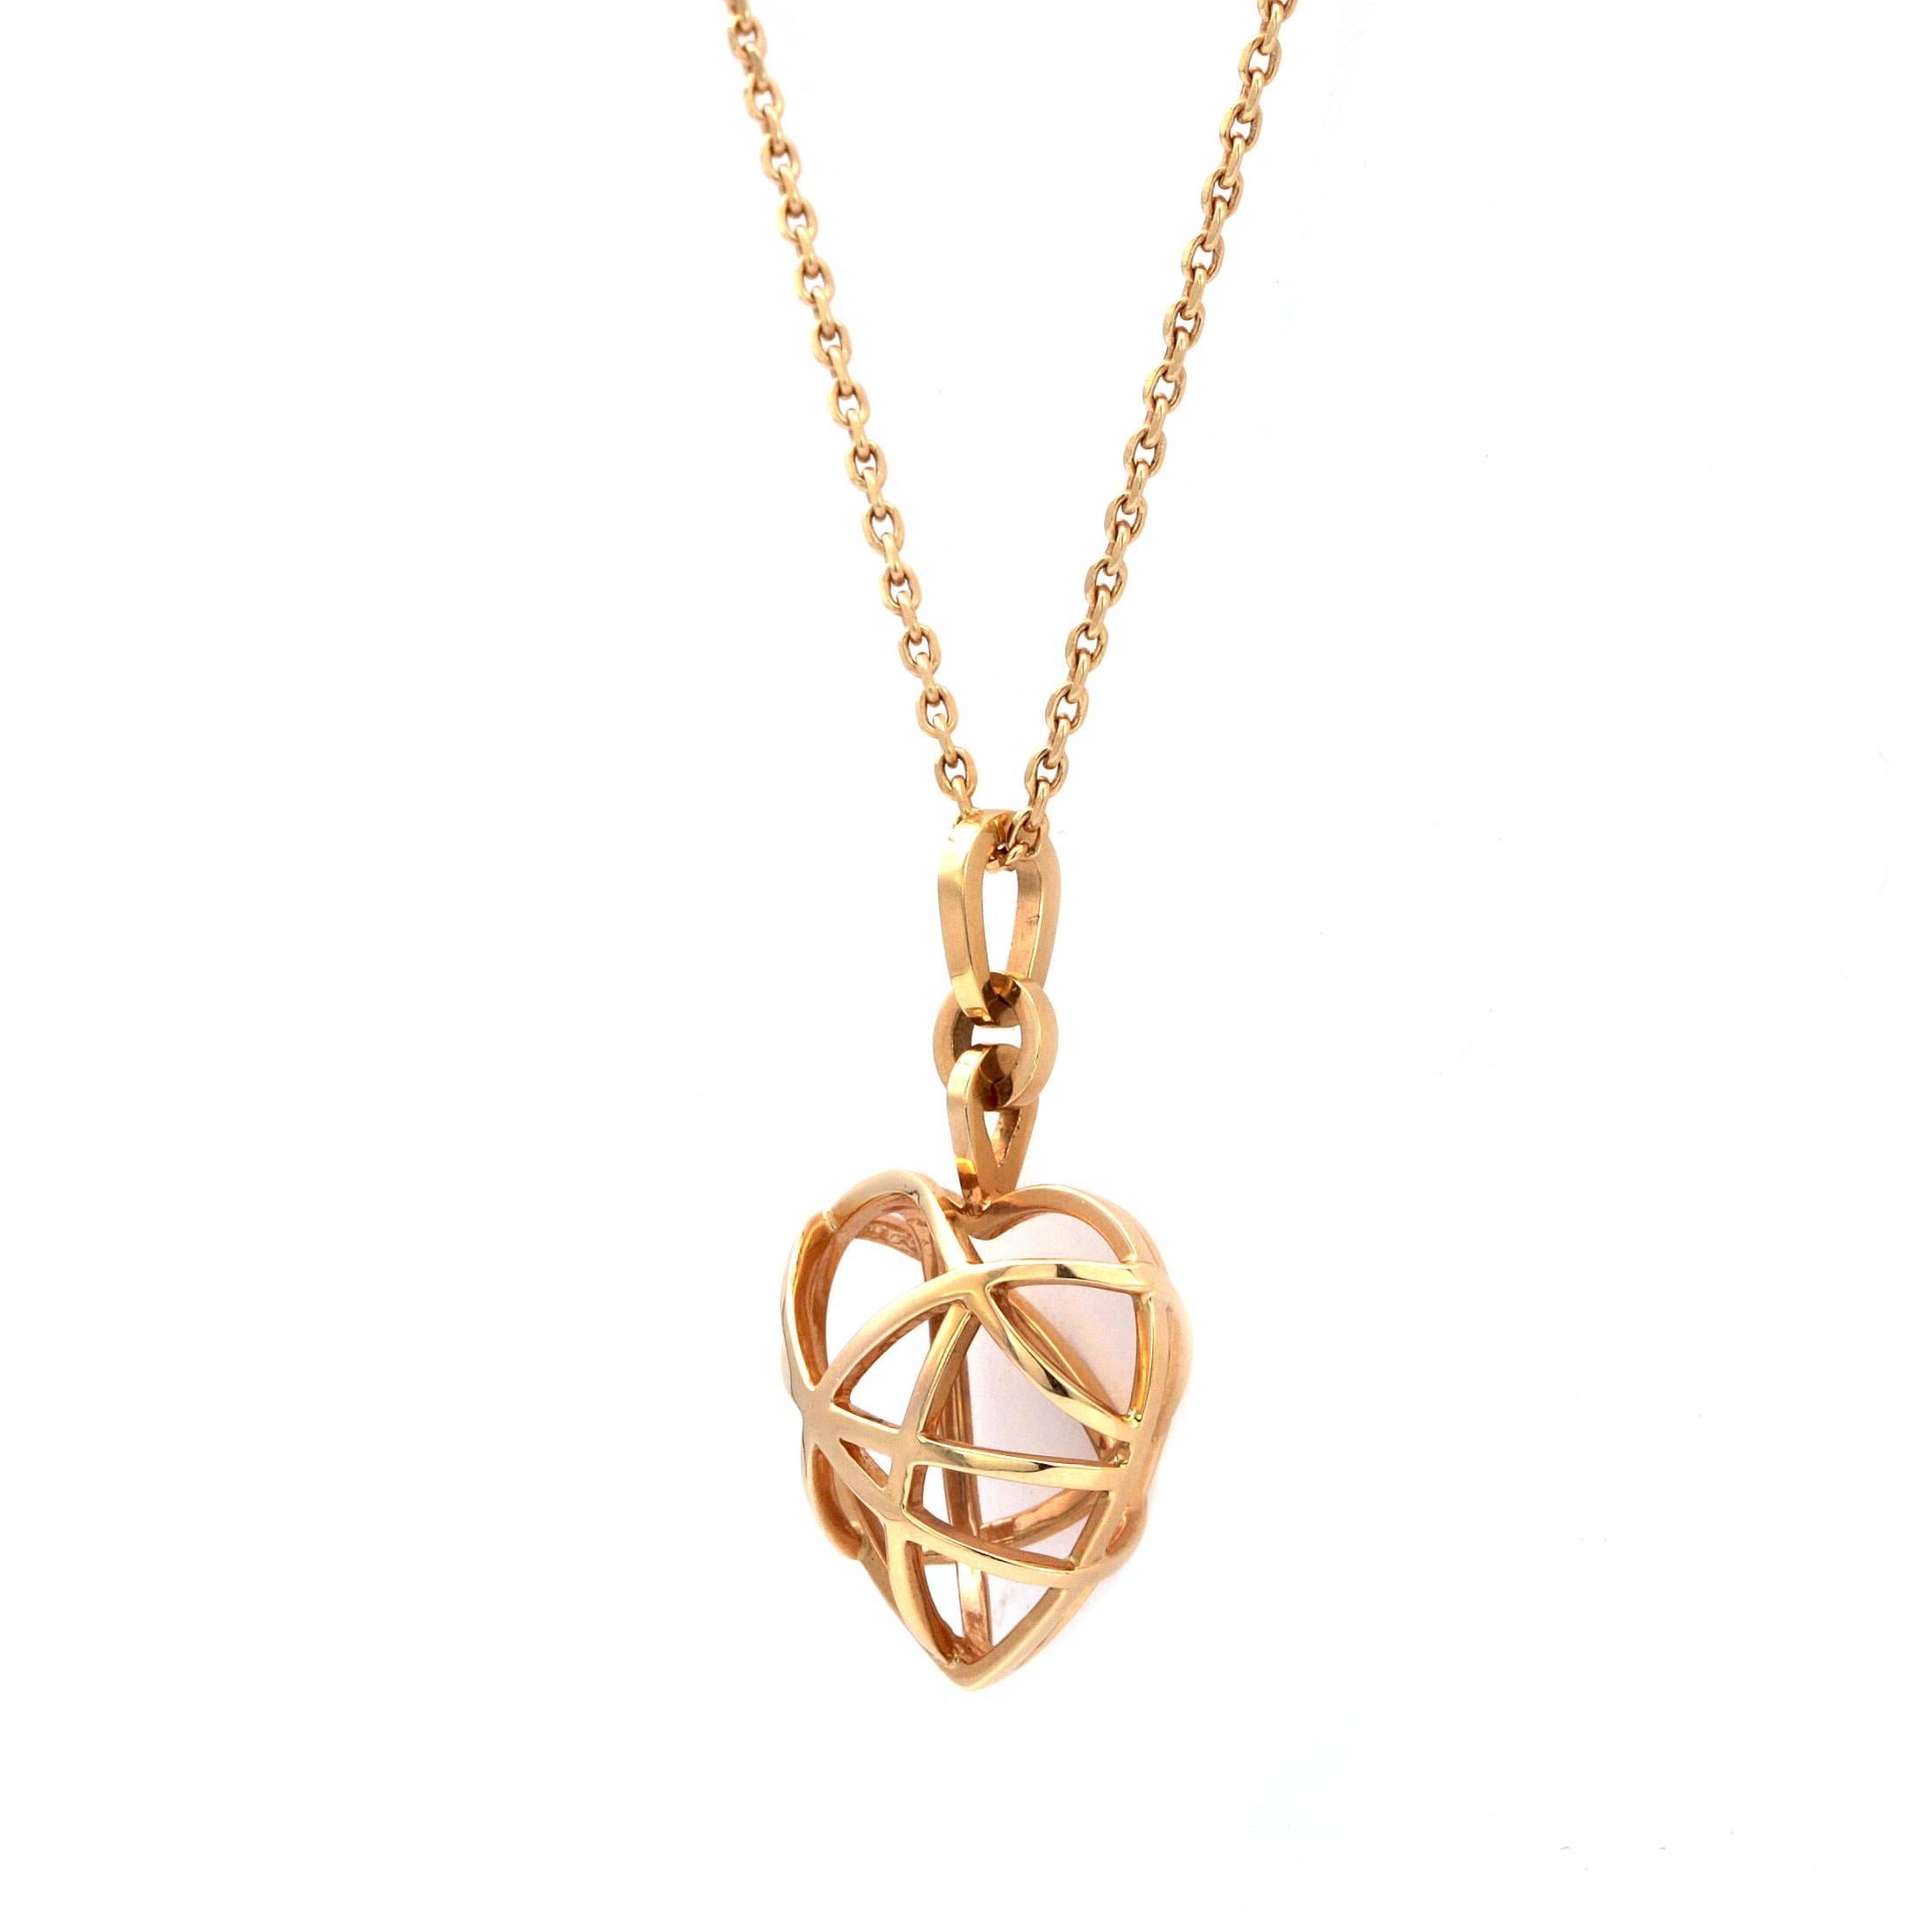 The Chopard 18K Rose Gold 3D cage like Heart pendant with chain necklace from the Guli Collection. Its a stunning, creative, and eye catching design for the pendant to resemble a heart.
The Pendant can we worn on a different necklace.
The chain is